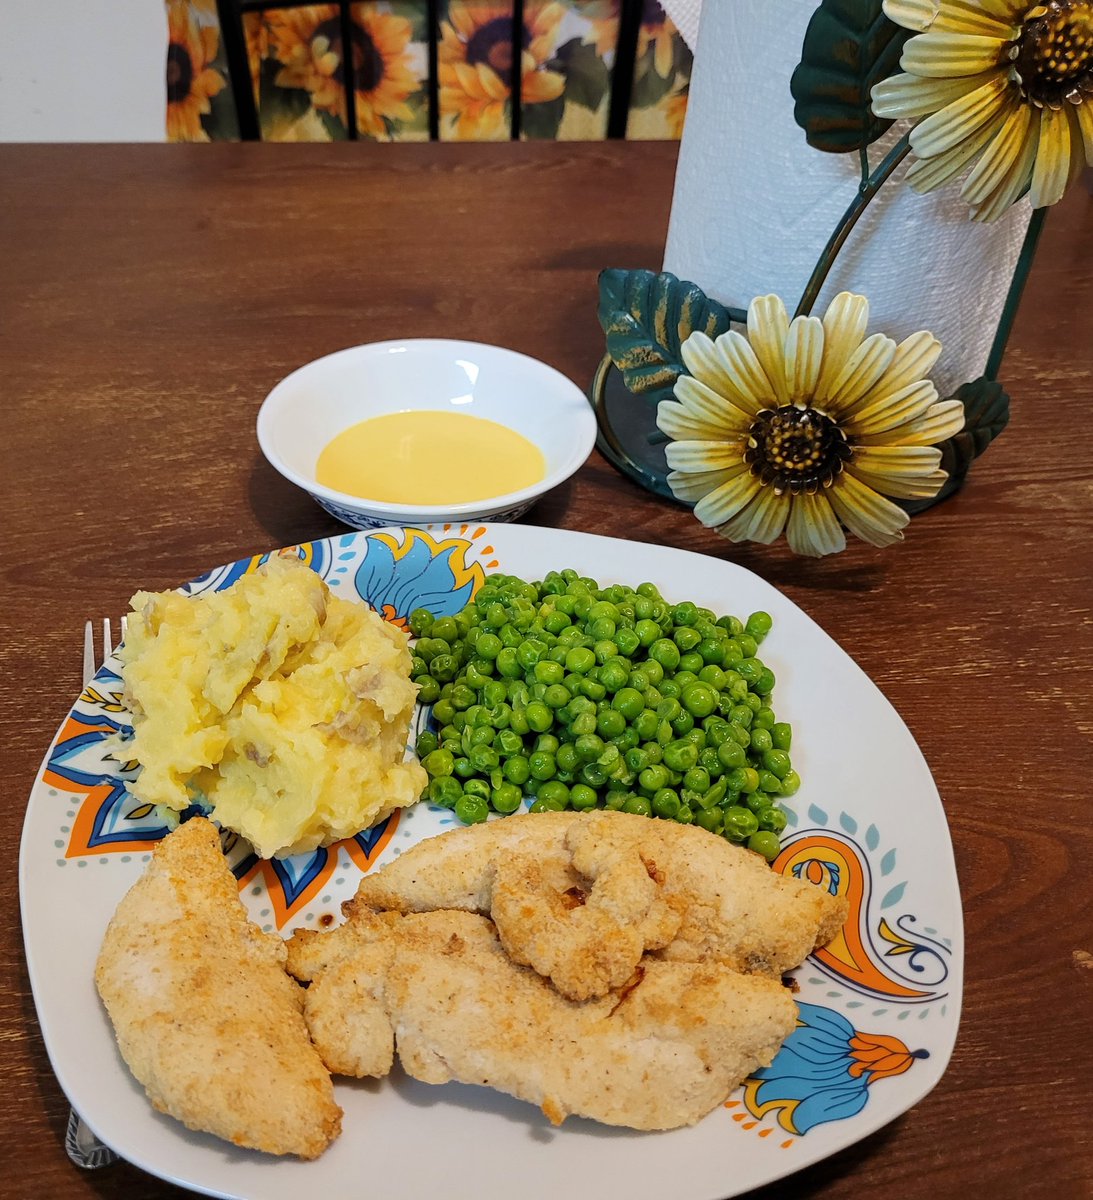 #TwitterSupperClub #Dinner at my house is #DiabeticFriendly chicken tenders with a #homemade honey mustard, mashed potato (yes, I love the skins!) & buttered/salted peas. #delicious #T1D #HealthyLiving #HealthyFood #HealthyEating